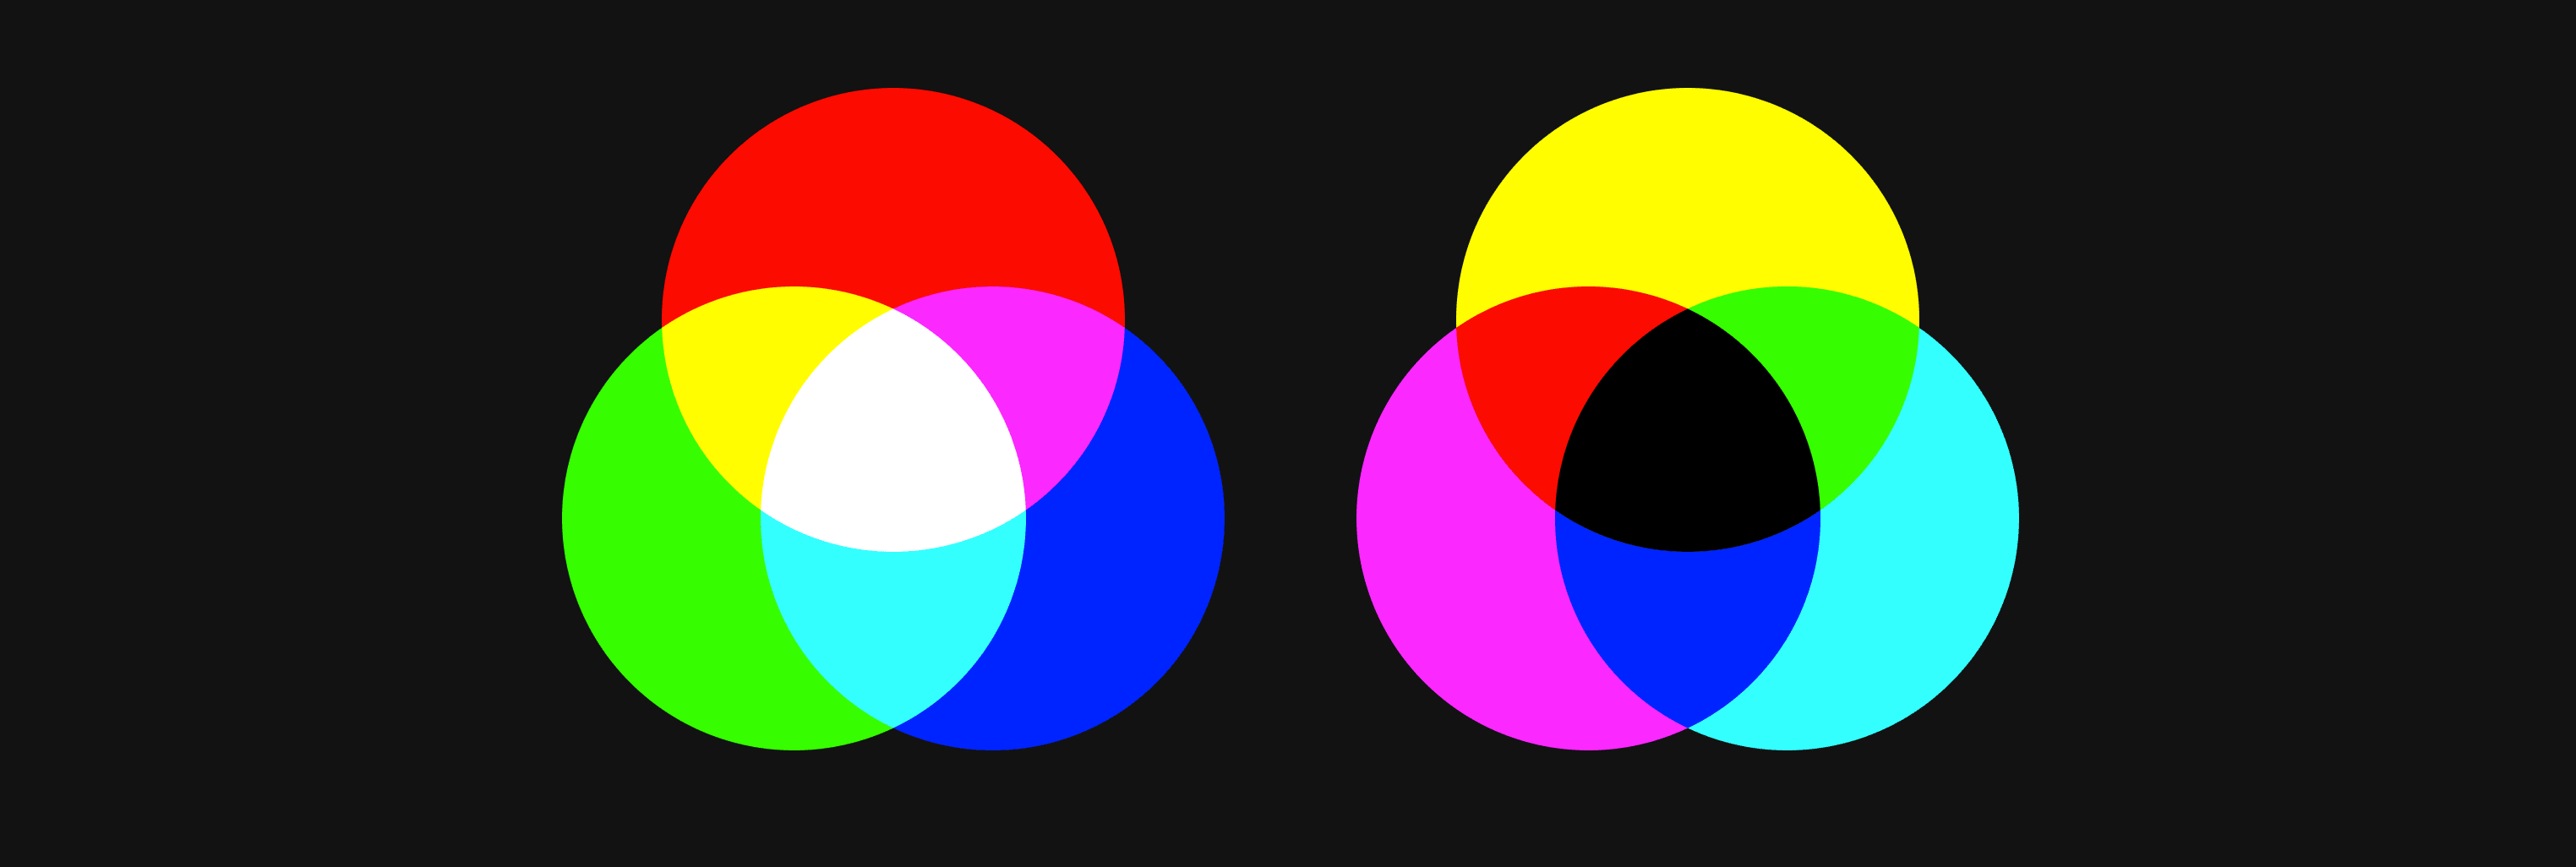 RGB and CMYK mixed with circles